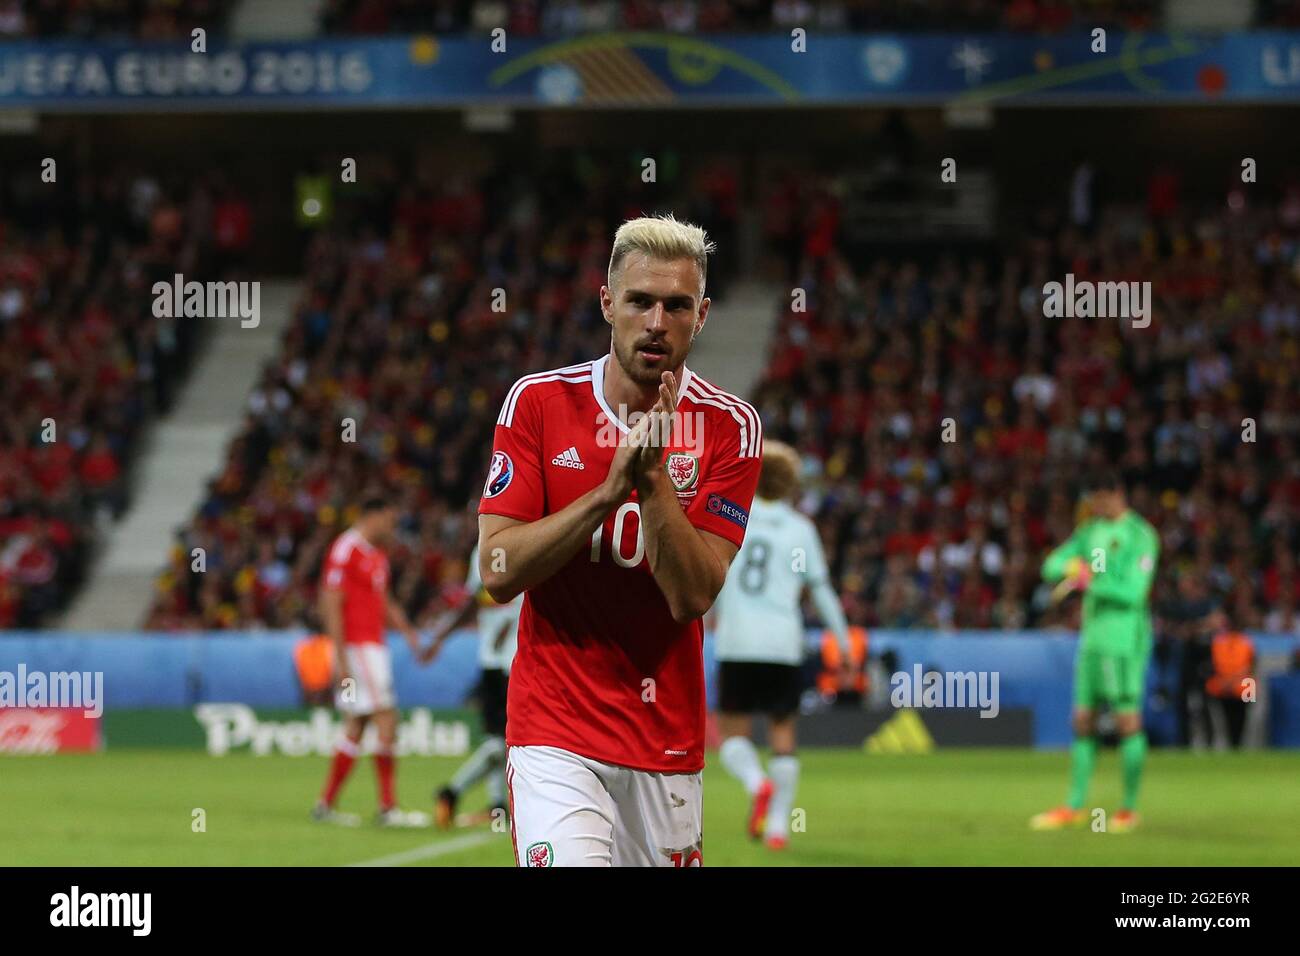 Aaron Ramsey of Wales with bleached blonde hair. Belgium v Wales, UEFA Euro 2016 quarter-final match at the Stade Pierre Mauroy in Lille, France . Jul Stock Photo